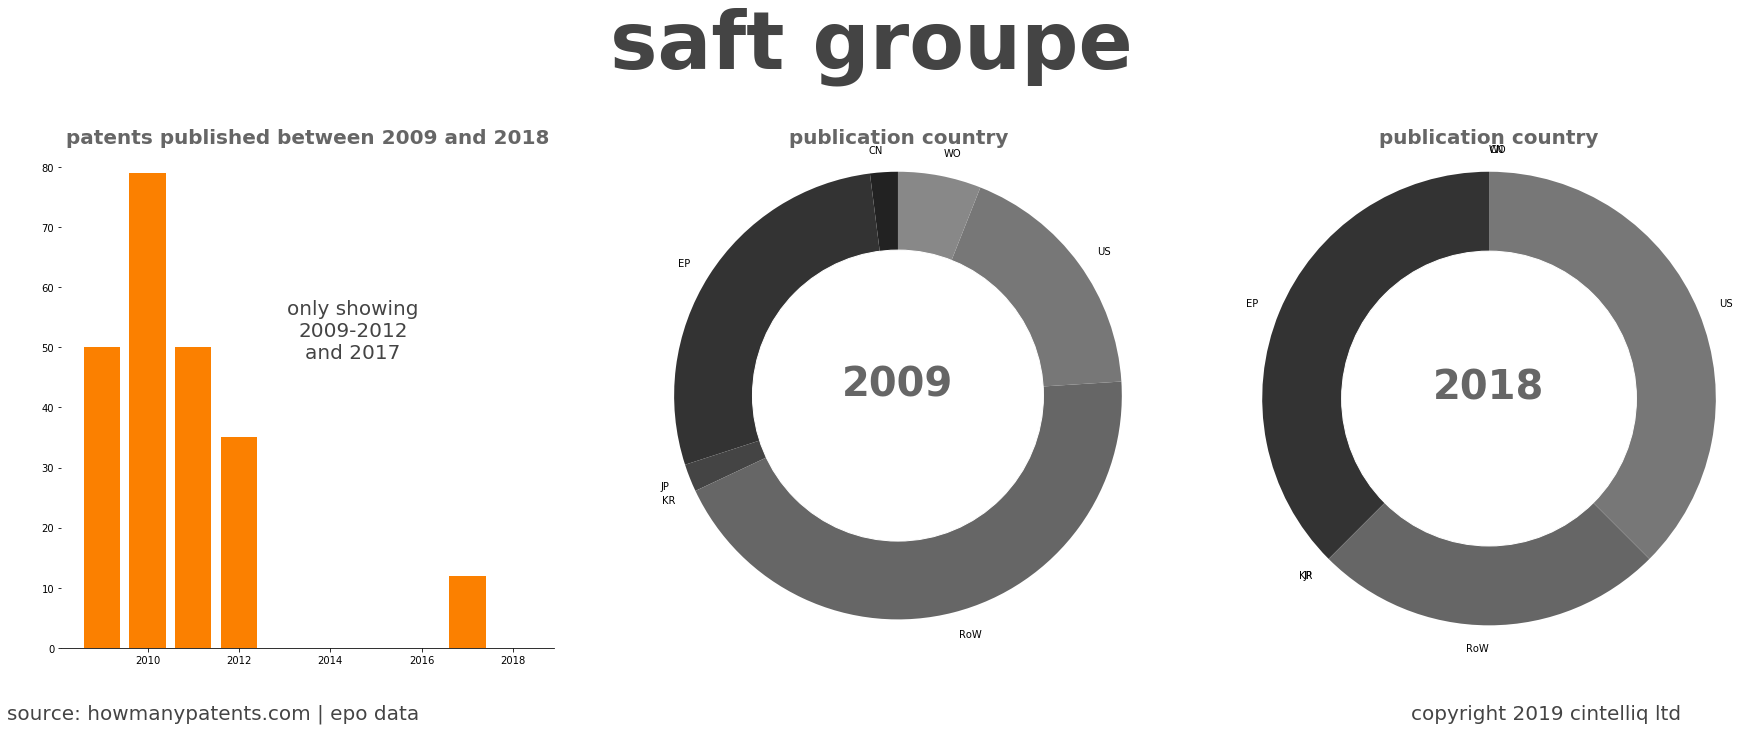 summary of patents for Saft Groupe